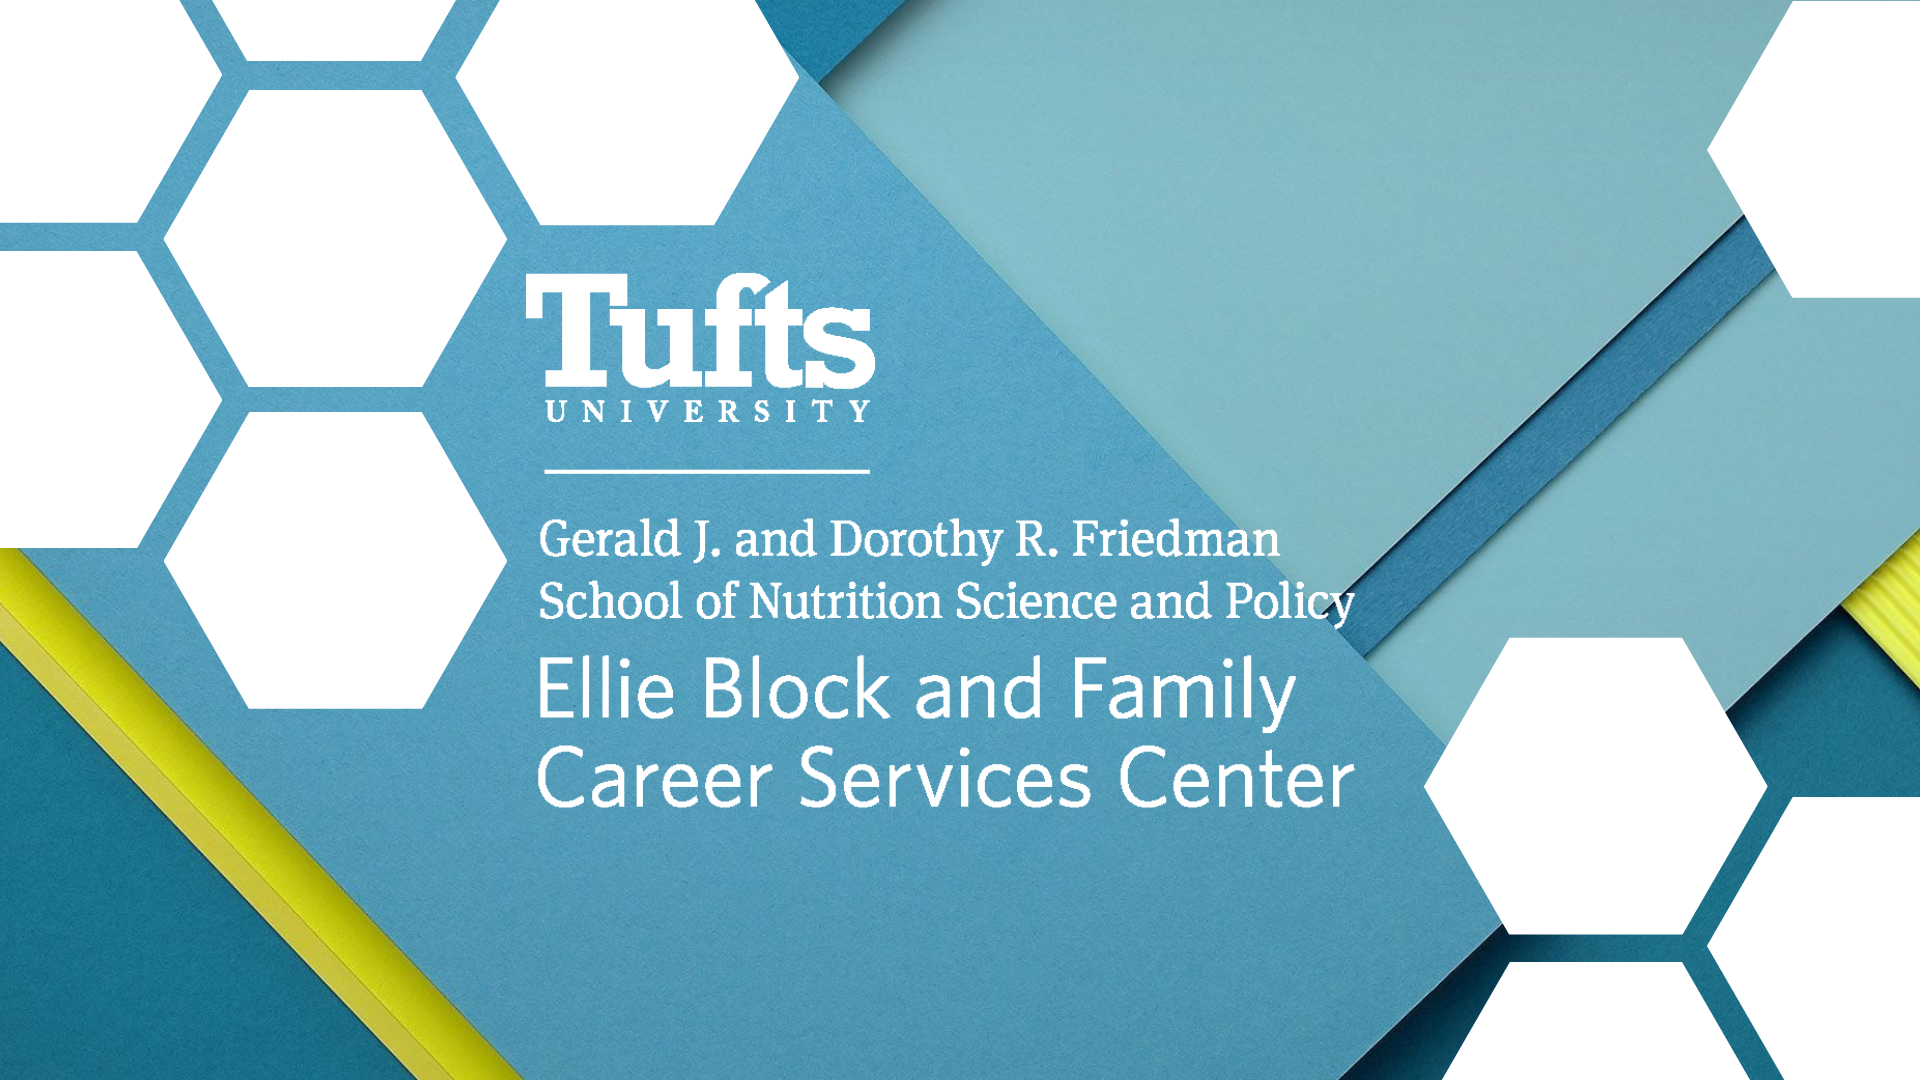 Ellie Block, longtime supporter of and advisor to the school, has created a new Career Services Center for the Friedman School